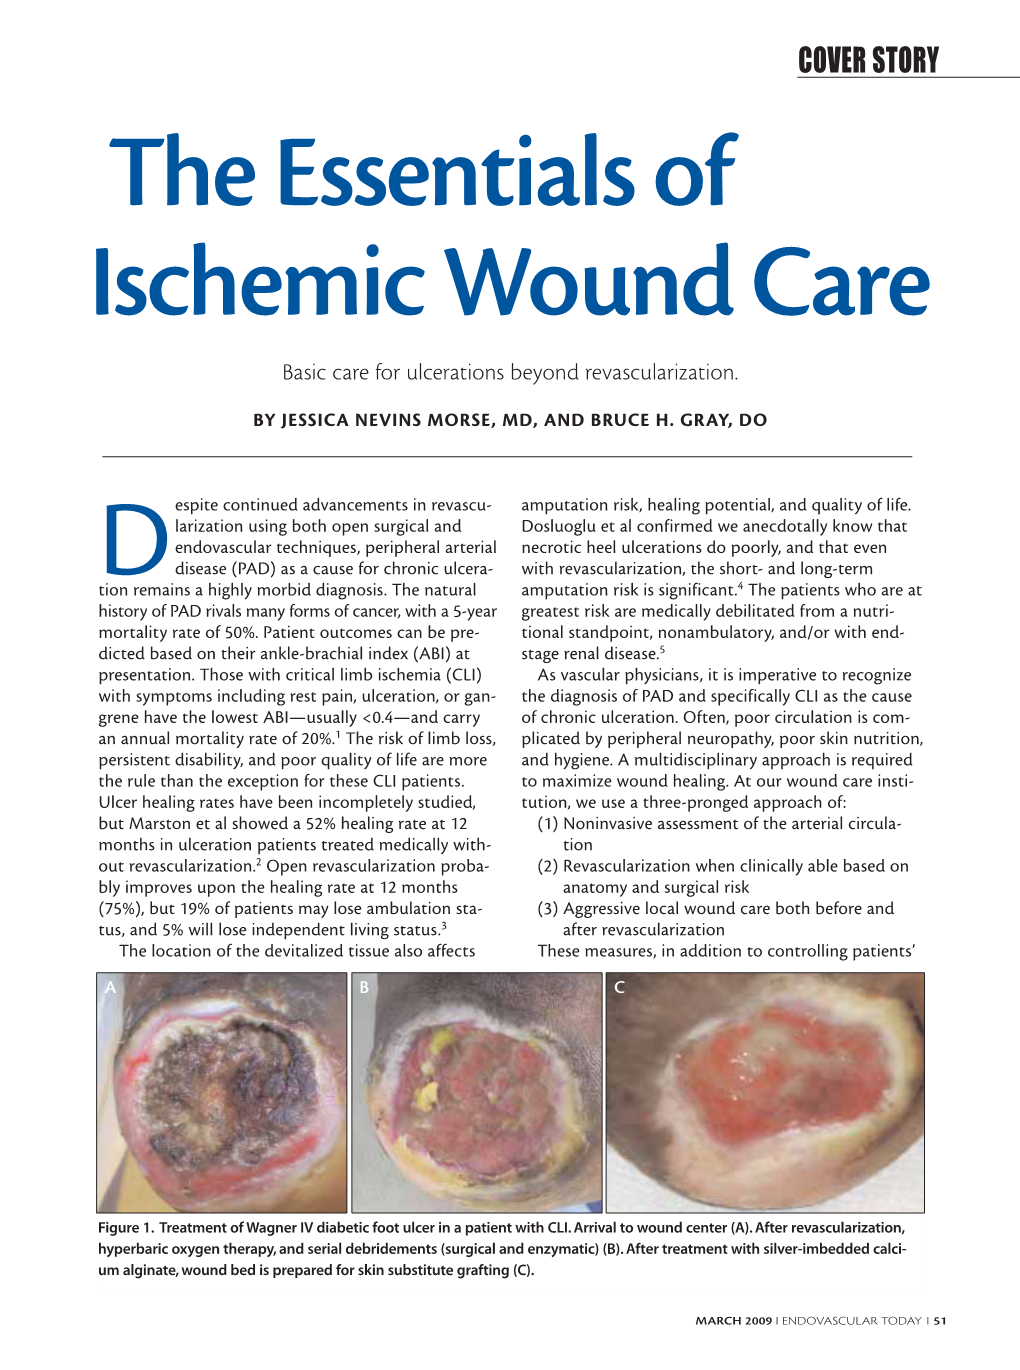 The Essentials of Ischemic Wound Care Basic Care for Ulcerations Beyond Revascularization